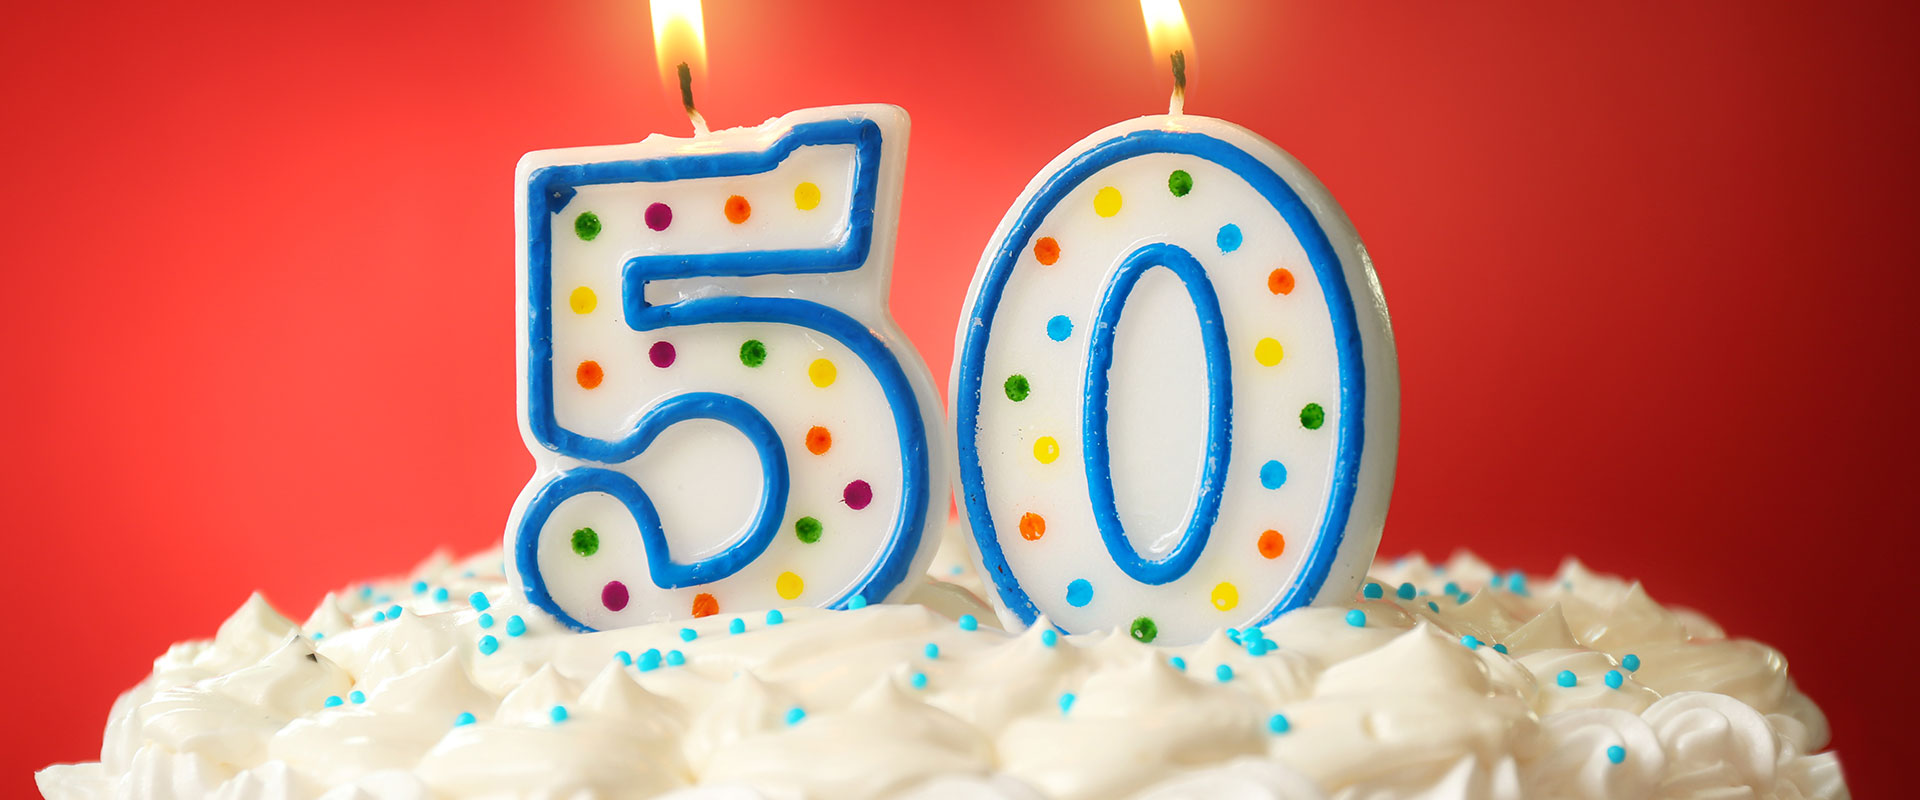 50th birthday / 50 candle on cake